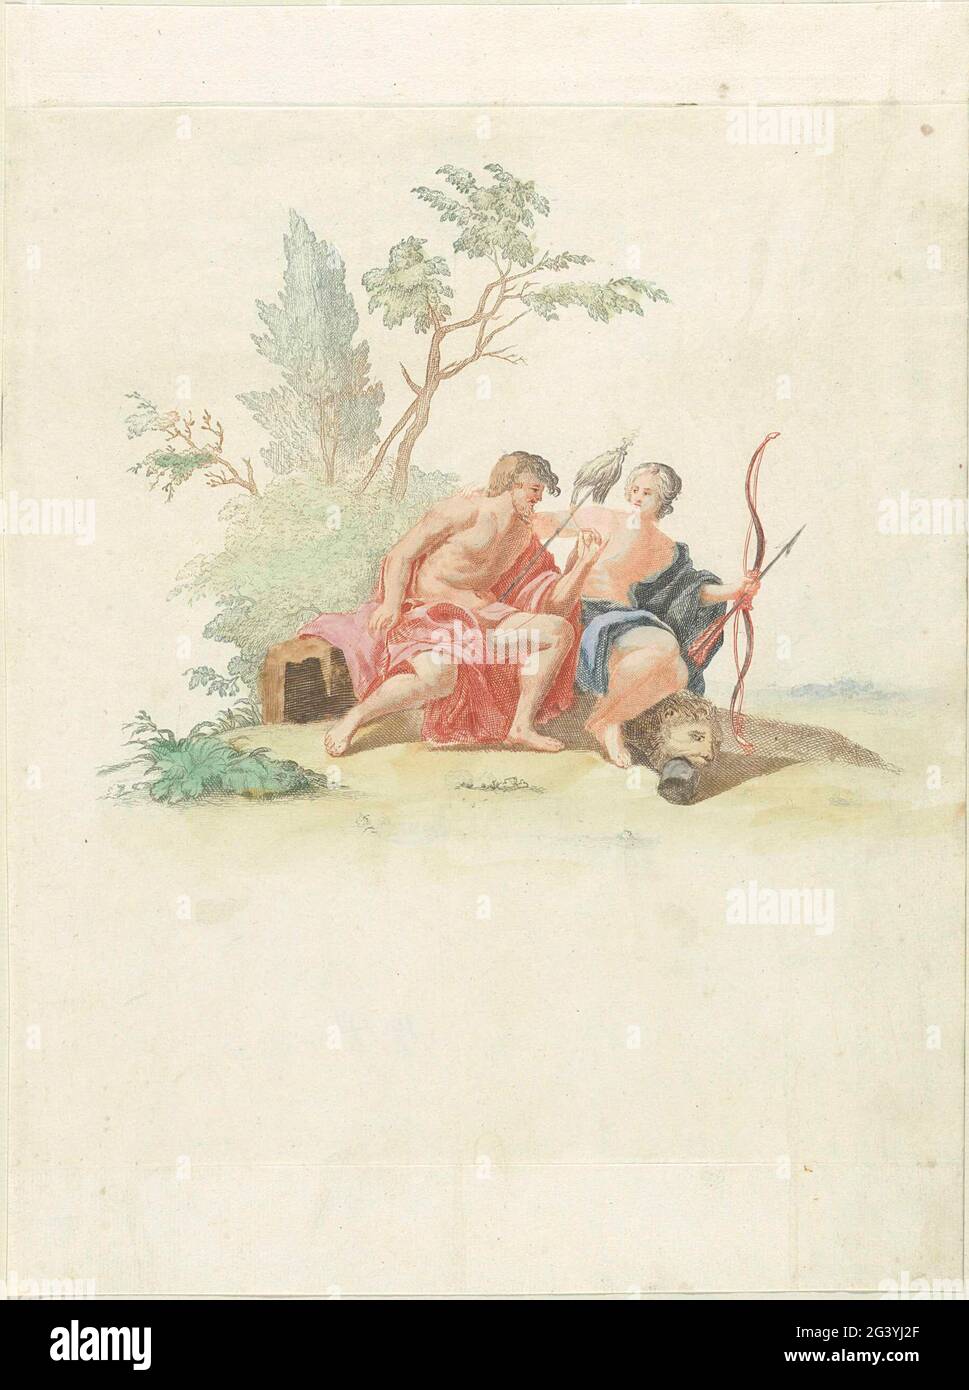 Hercules and omphal. Hercules is next to omphal, Queen of Lydia, who has hit an arm around him. As a slave in the service of Omphal, Hercules was waiting. He has her spin skirt in his hands. She has his arrow and bow and the lion skin and knots are at her feet. Stock Photo